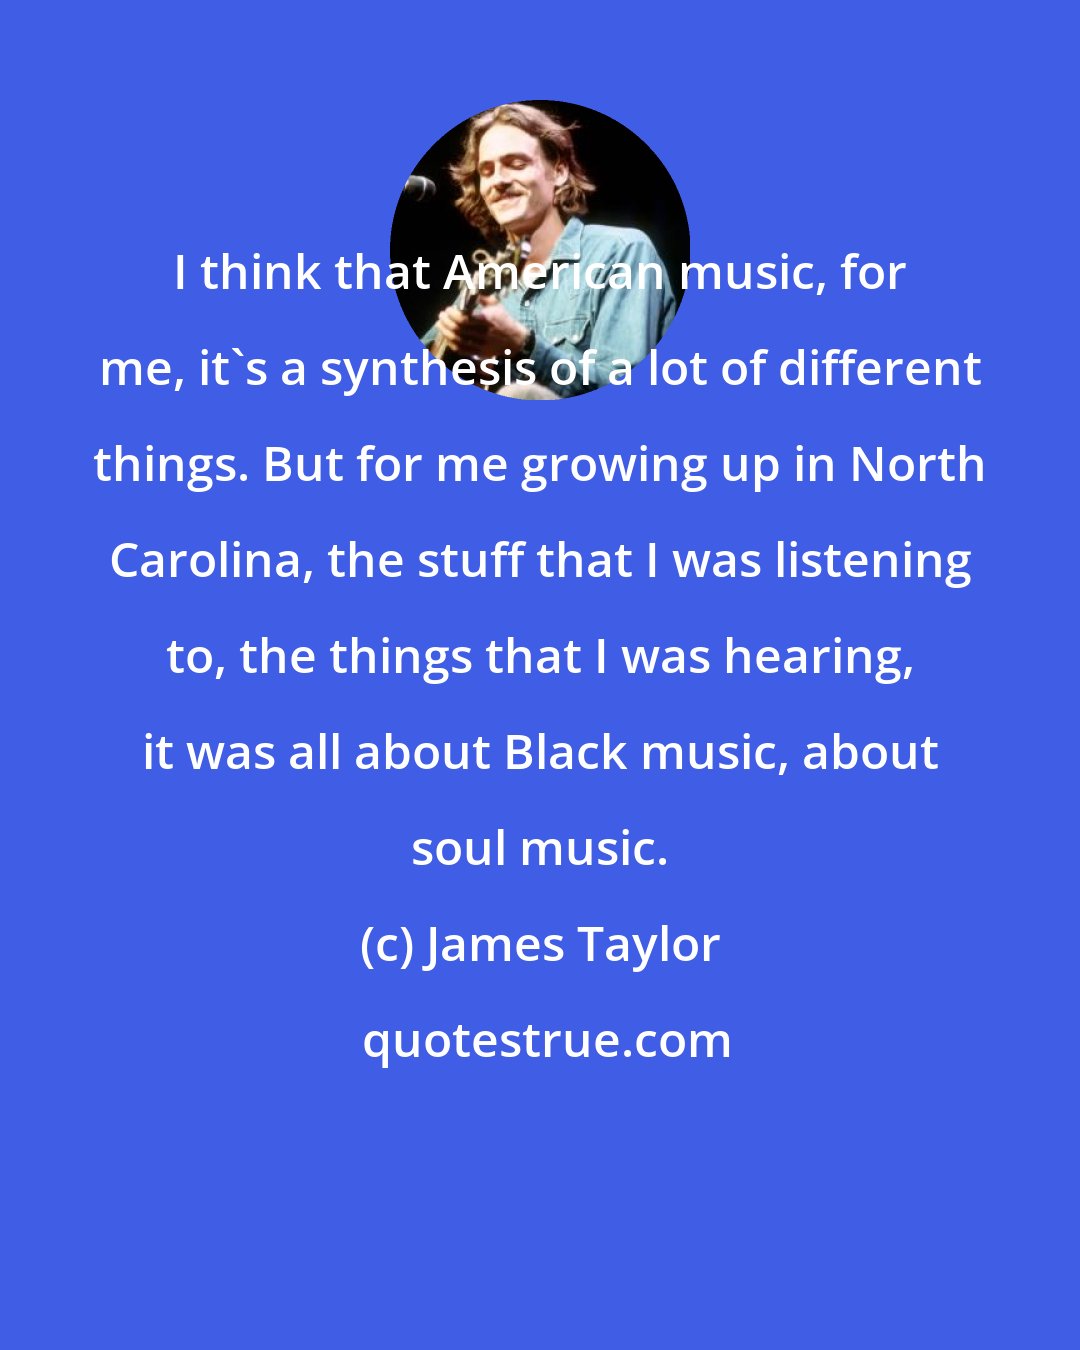 James Taylor: I think that American music, for me, it's a synthesis of a lot of different things. But for me growing up in North Carolina, the stuff that I was listening to, the things that I was hearing, it was all about Black music, about soul music.